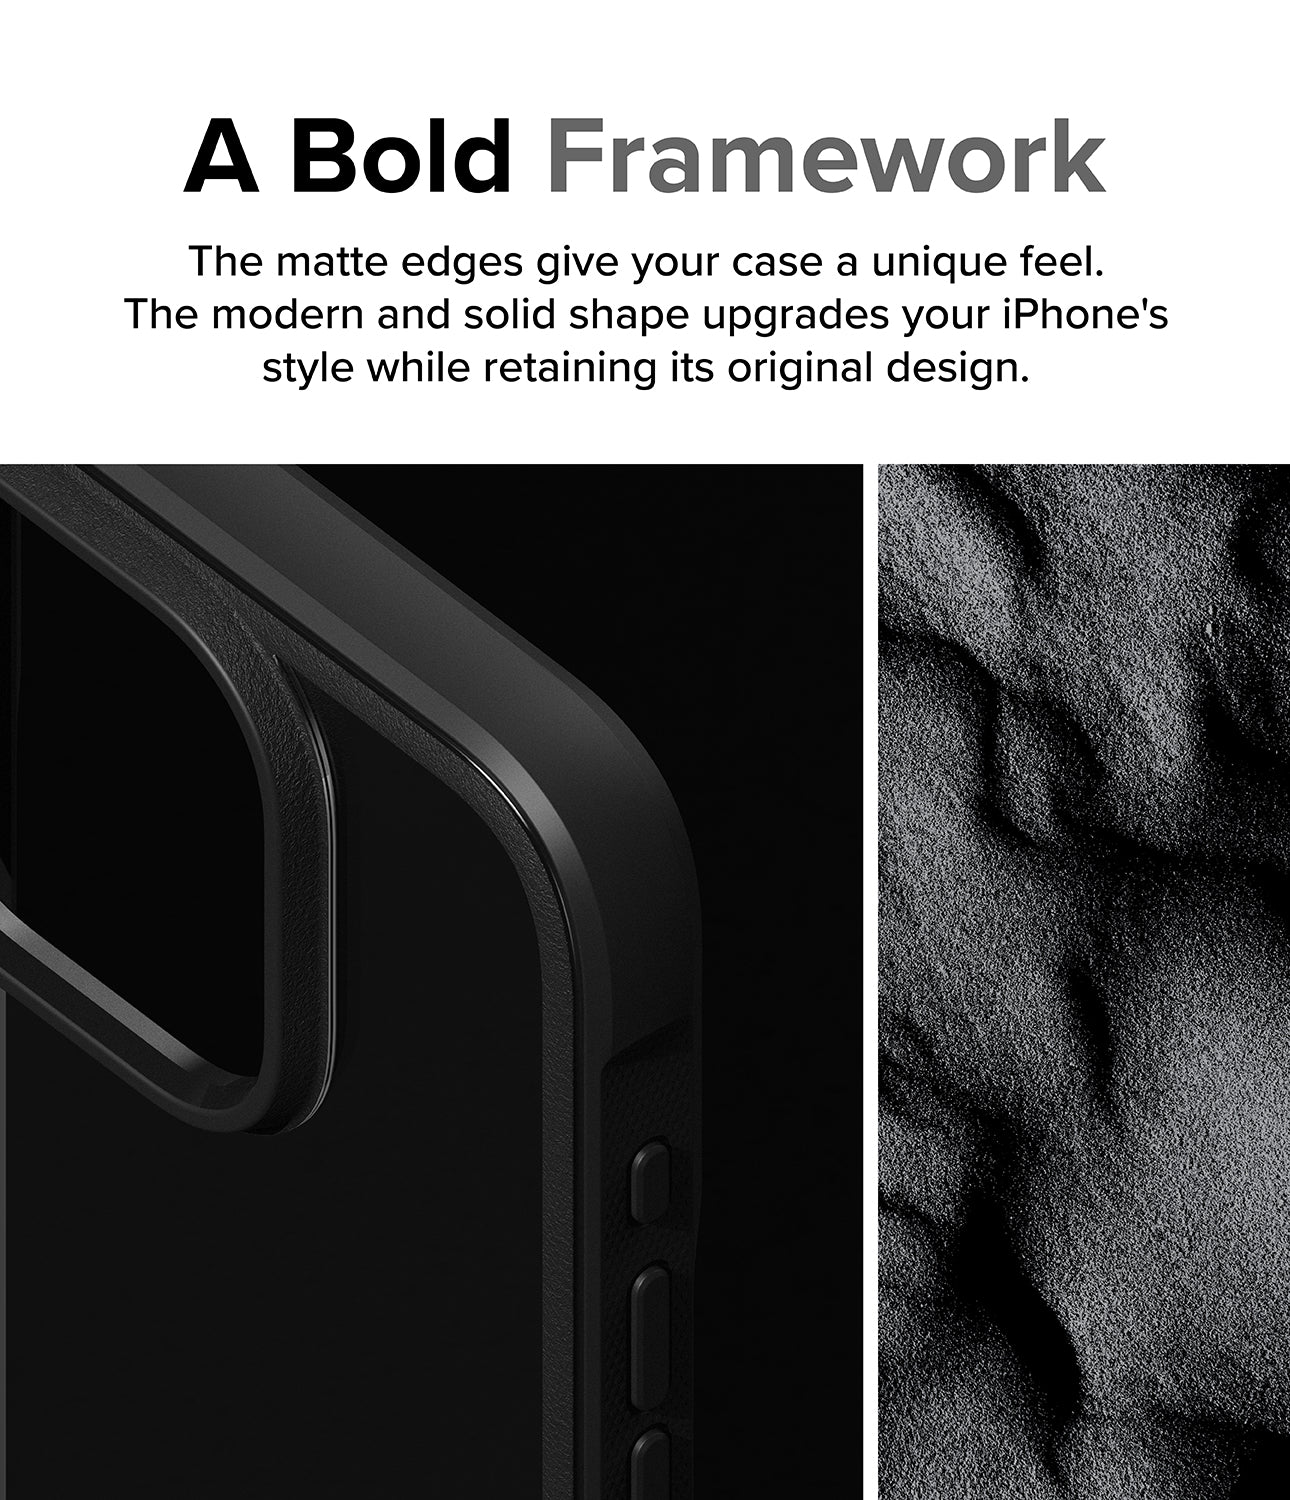 iPhone 15 Pro Max Case | Fusion Bold Black - A Bold Framework. The matte edges give your case a unique feel. The modern and solid upgrades your iPhone's style while retaining its original design.